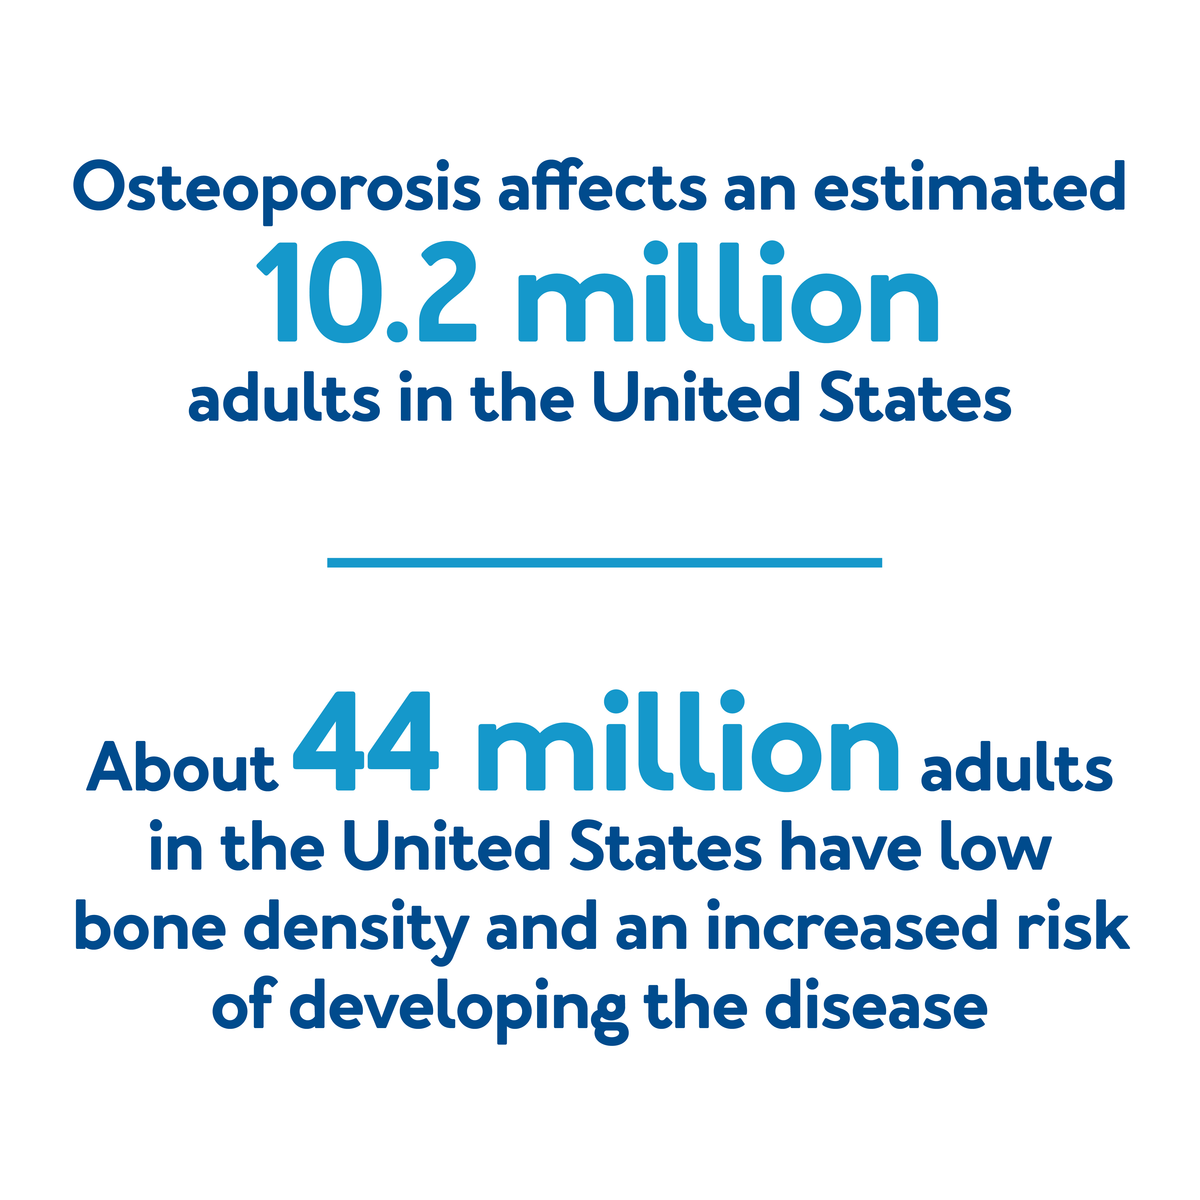 Osteoporosis affects an estimated 10.2 million adults in the United States. About 44 million adults in the United States have low bone density and an increased risk of developing the disease.